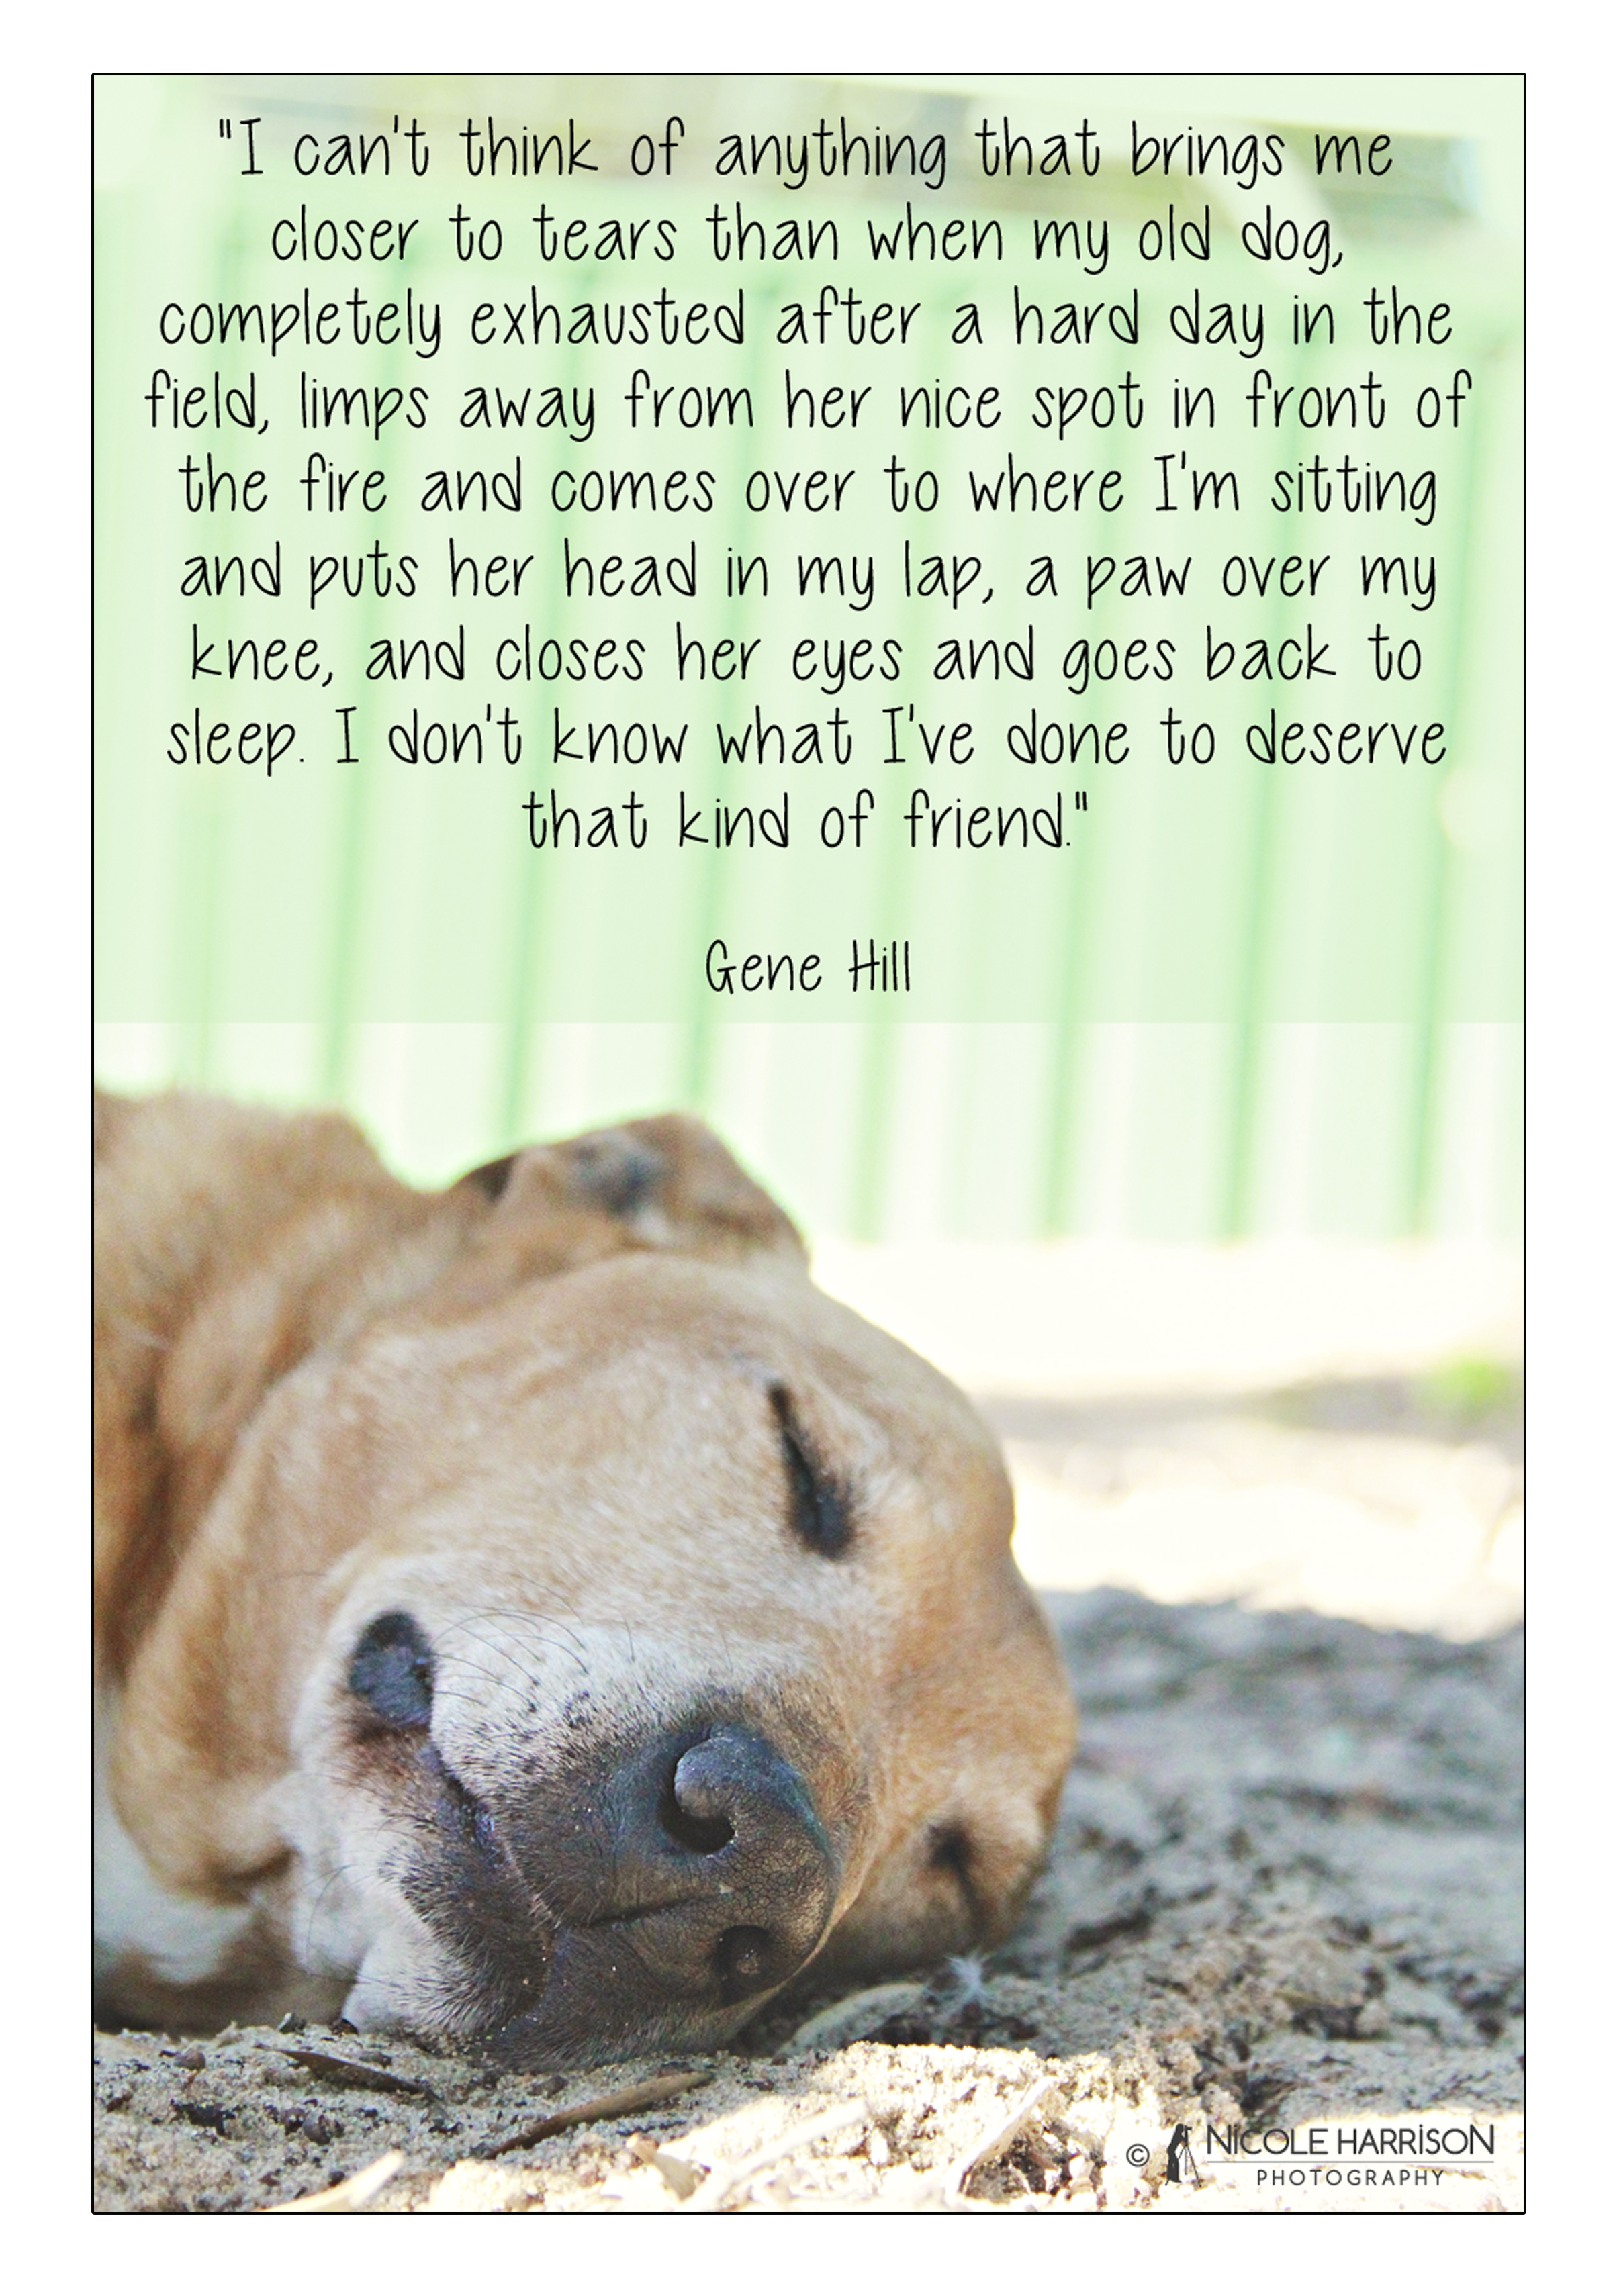 Quotes About Animal Shelters. QuotesGram